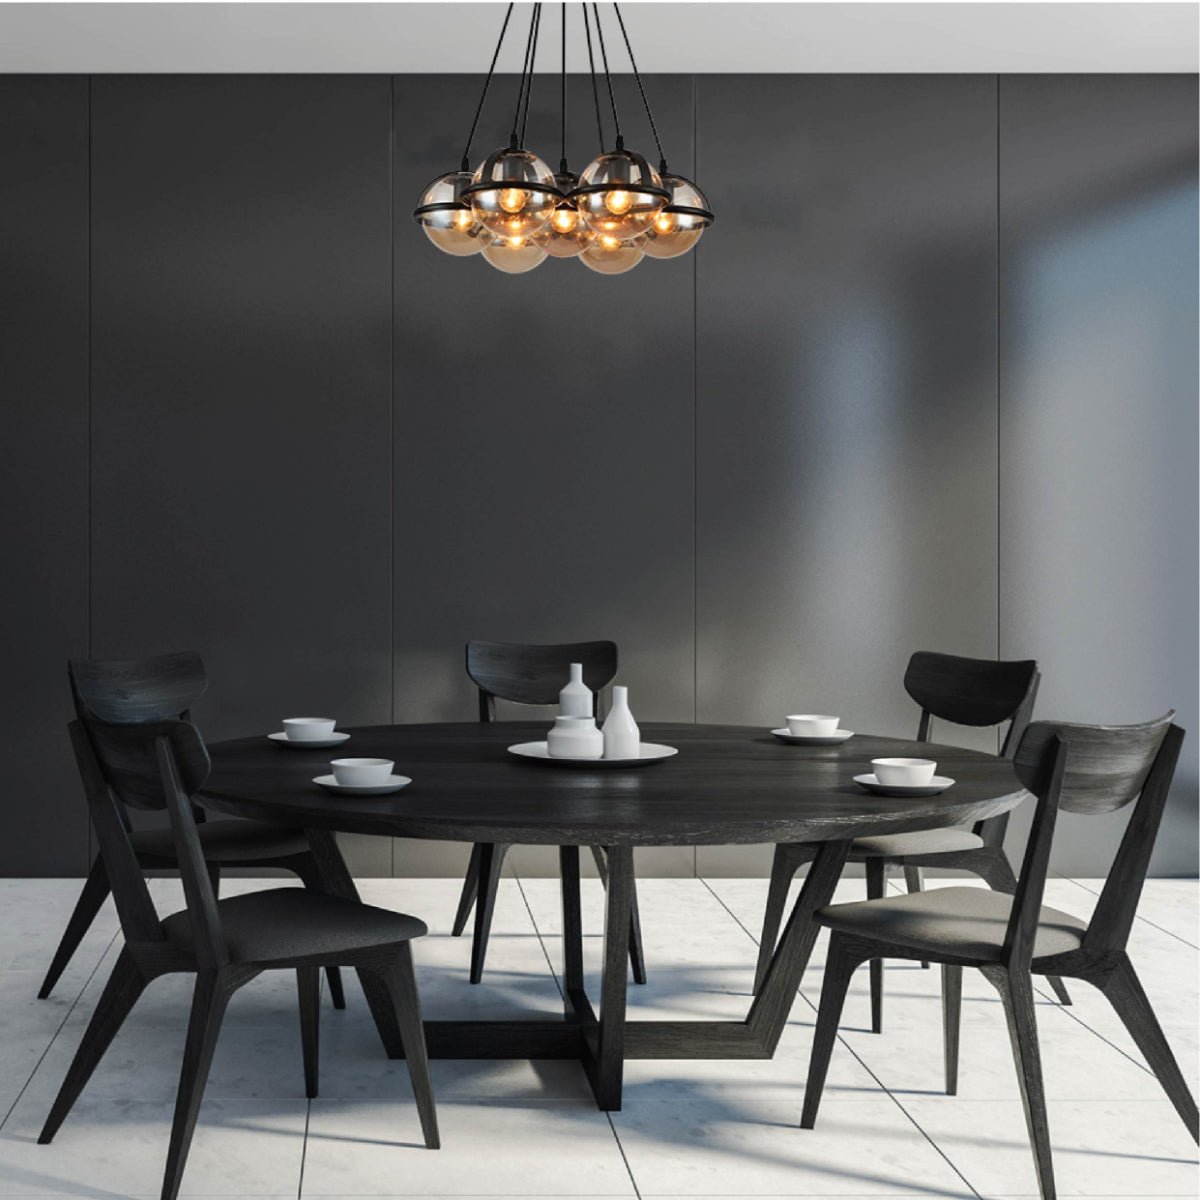 More interior usage of Amber Globe Glasses Daisy Modern Ceiling Light with 7xE27 Fittings | TEKLED 150-18105